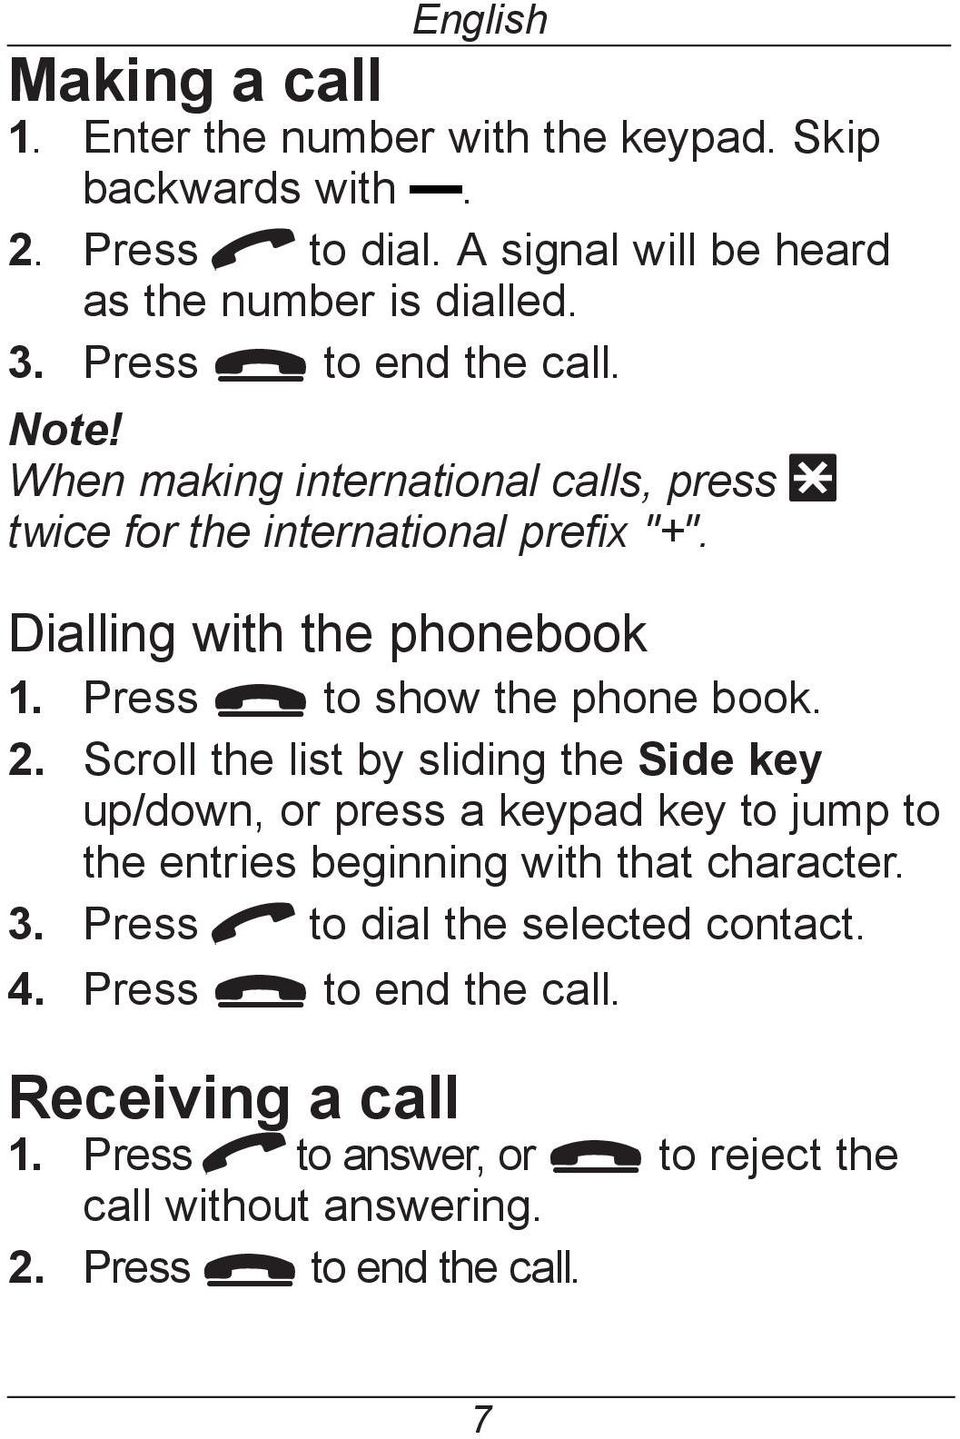 Press L to show the phone book. 2. Scroll the list by sliding the Side key up/down, or press a keypad key to jump to the entries beginning with that character.